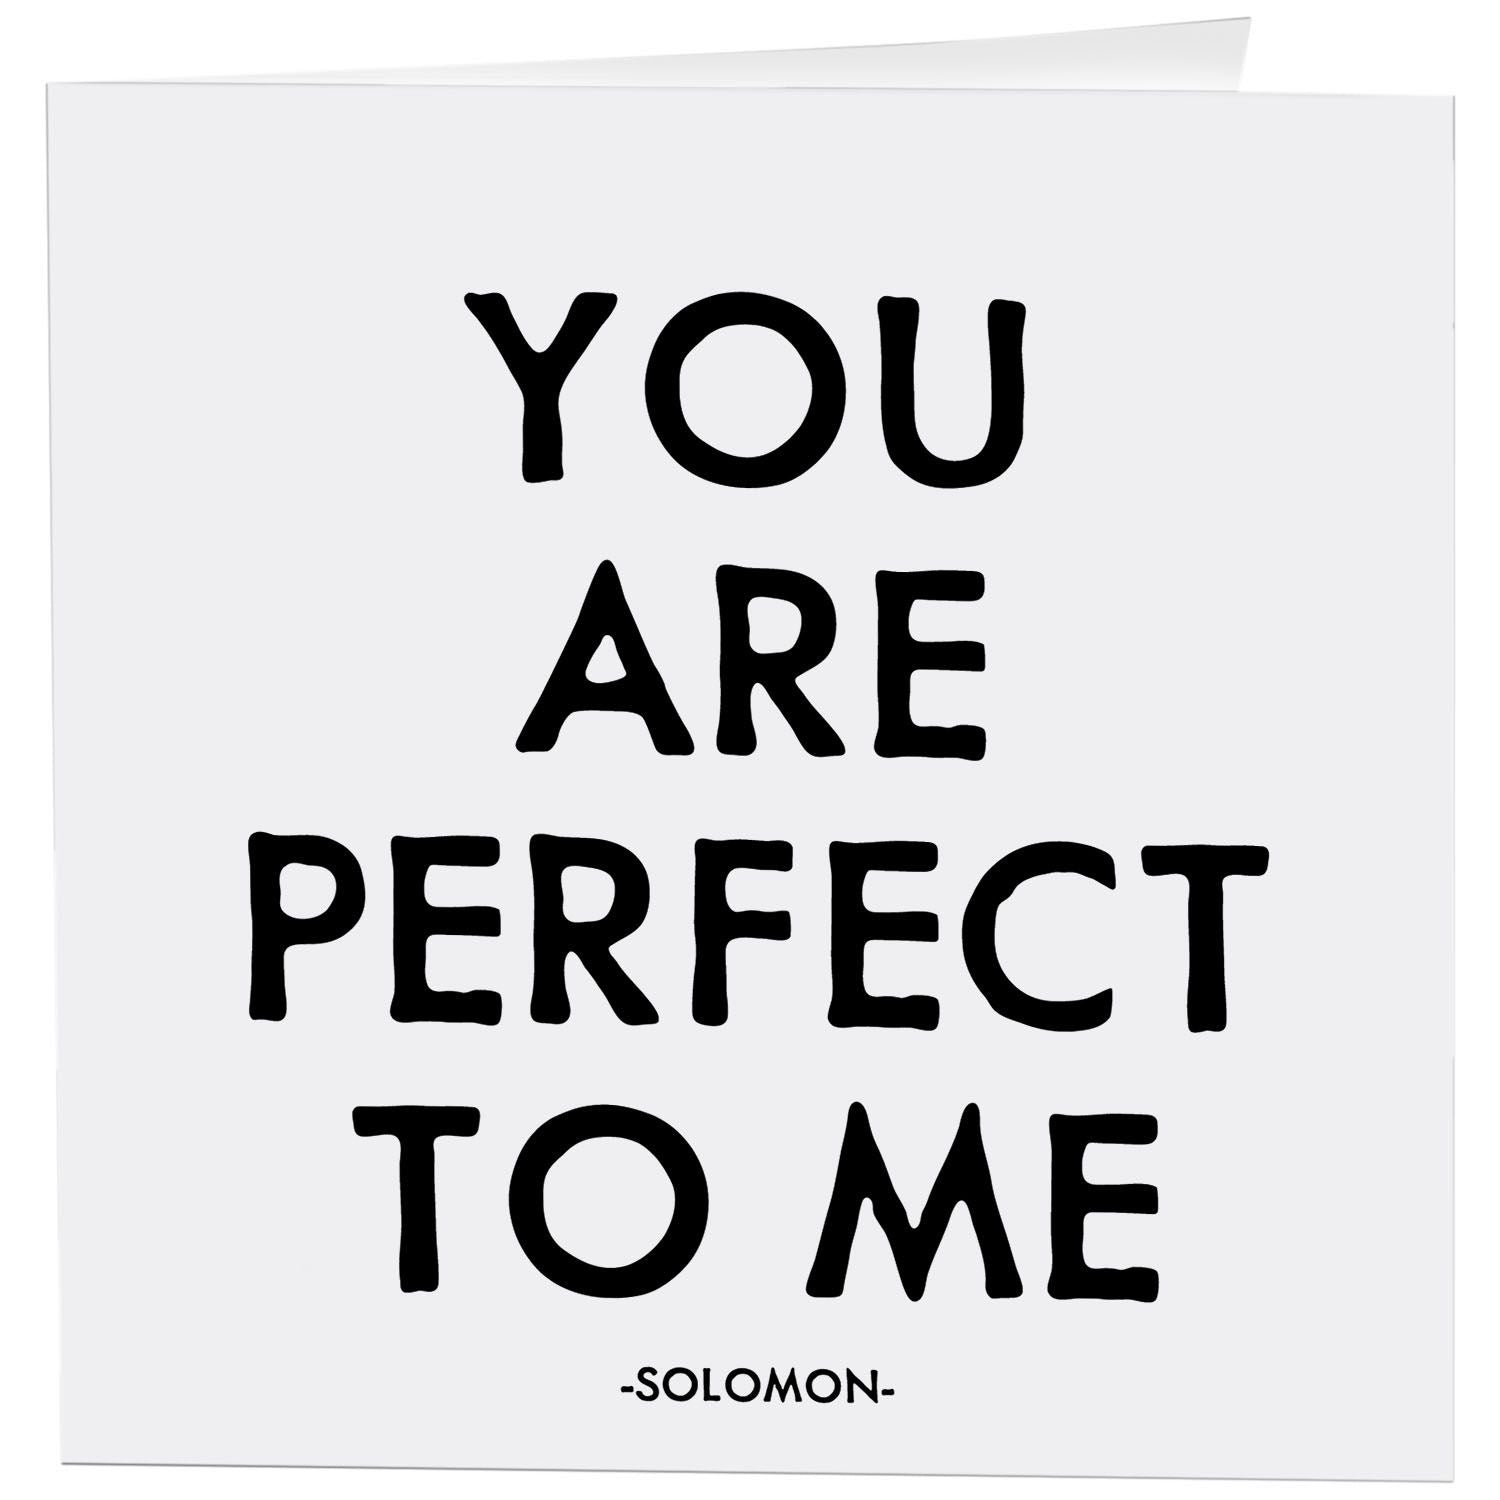 You are perfect to me